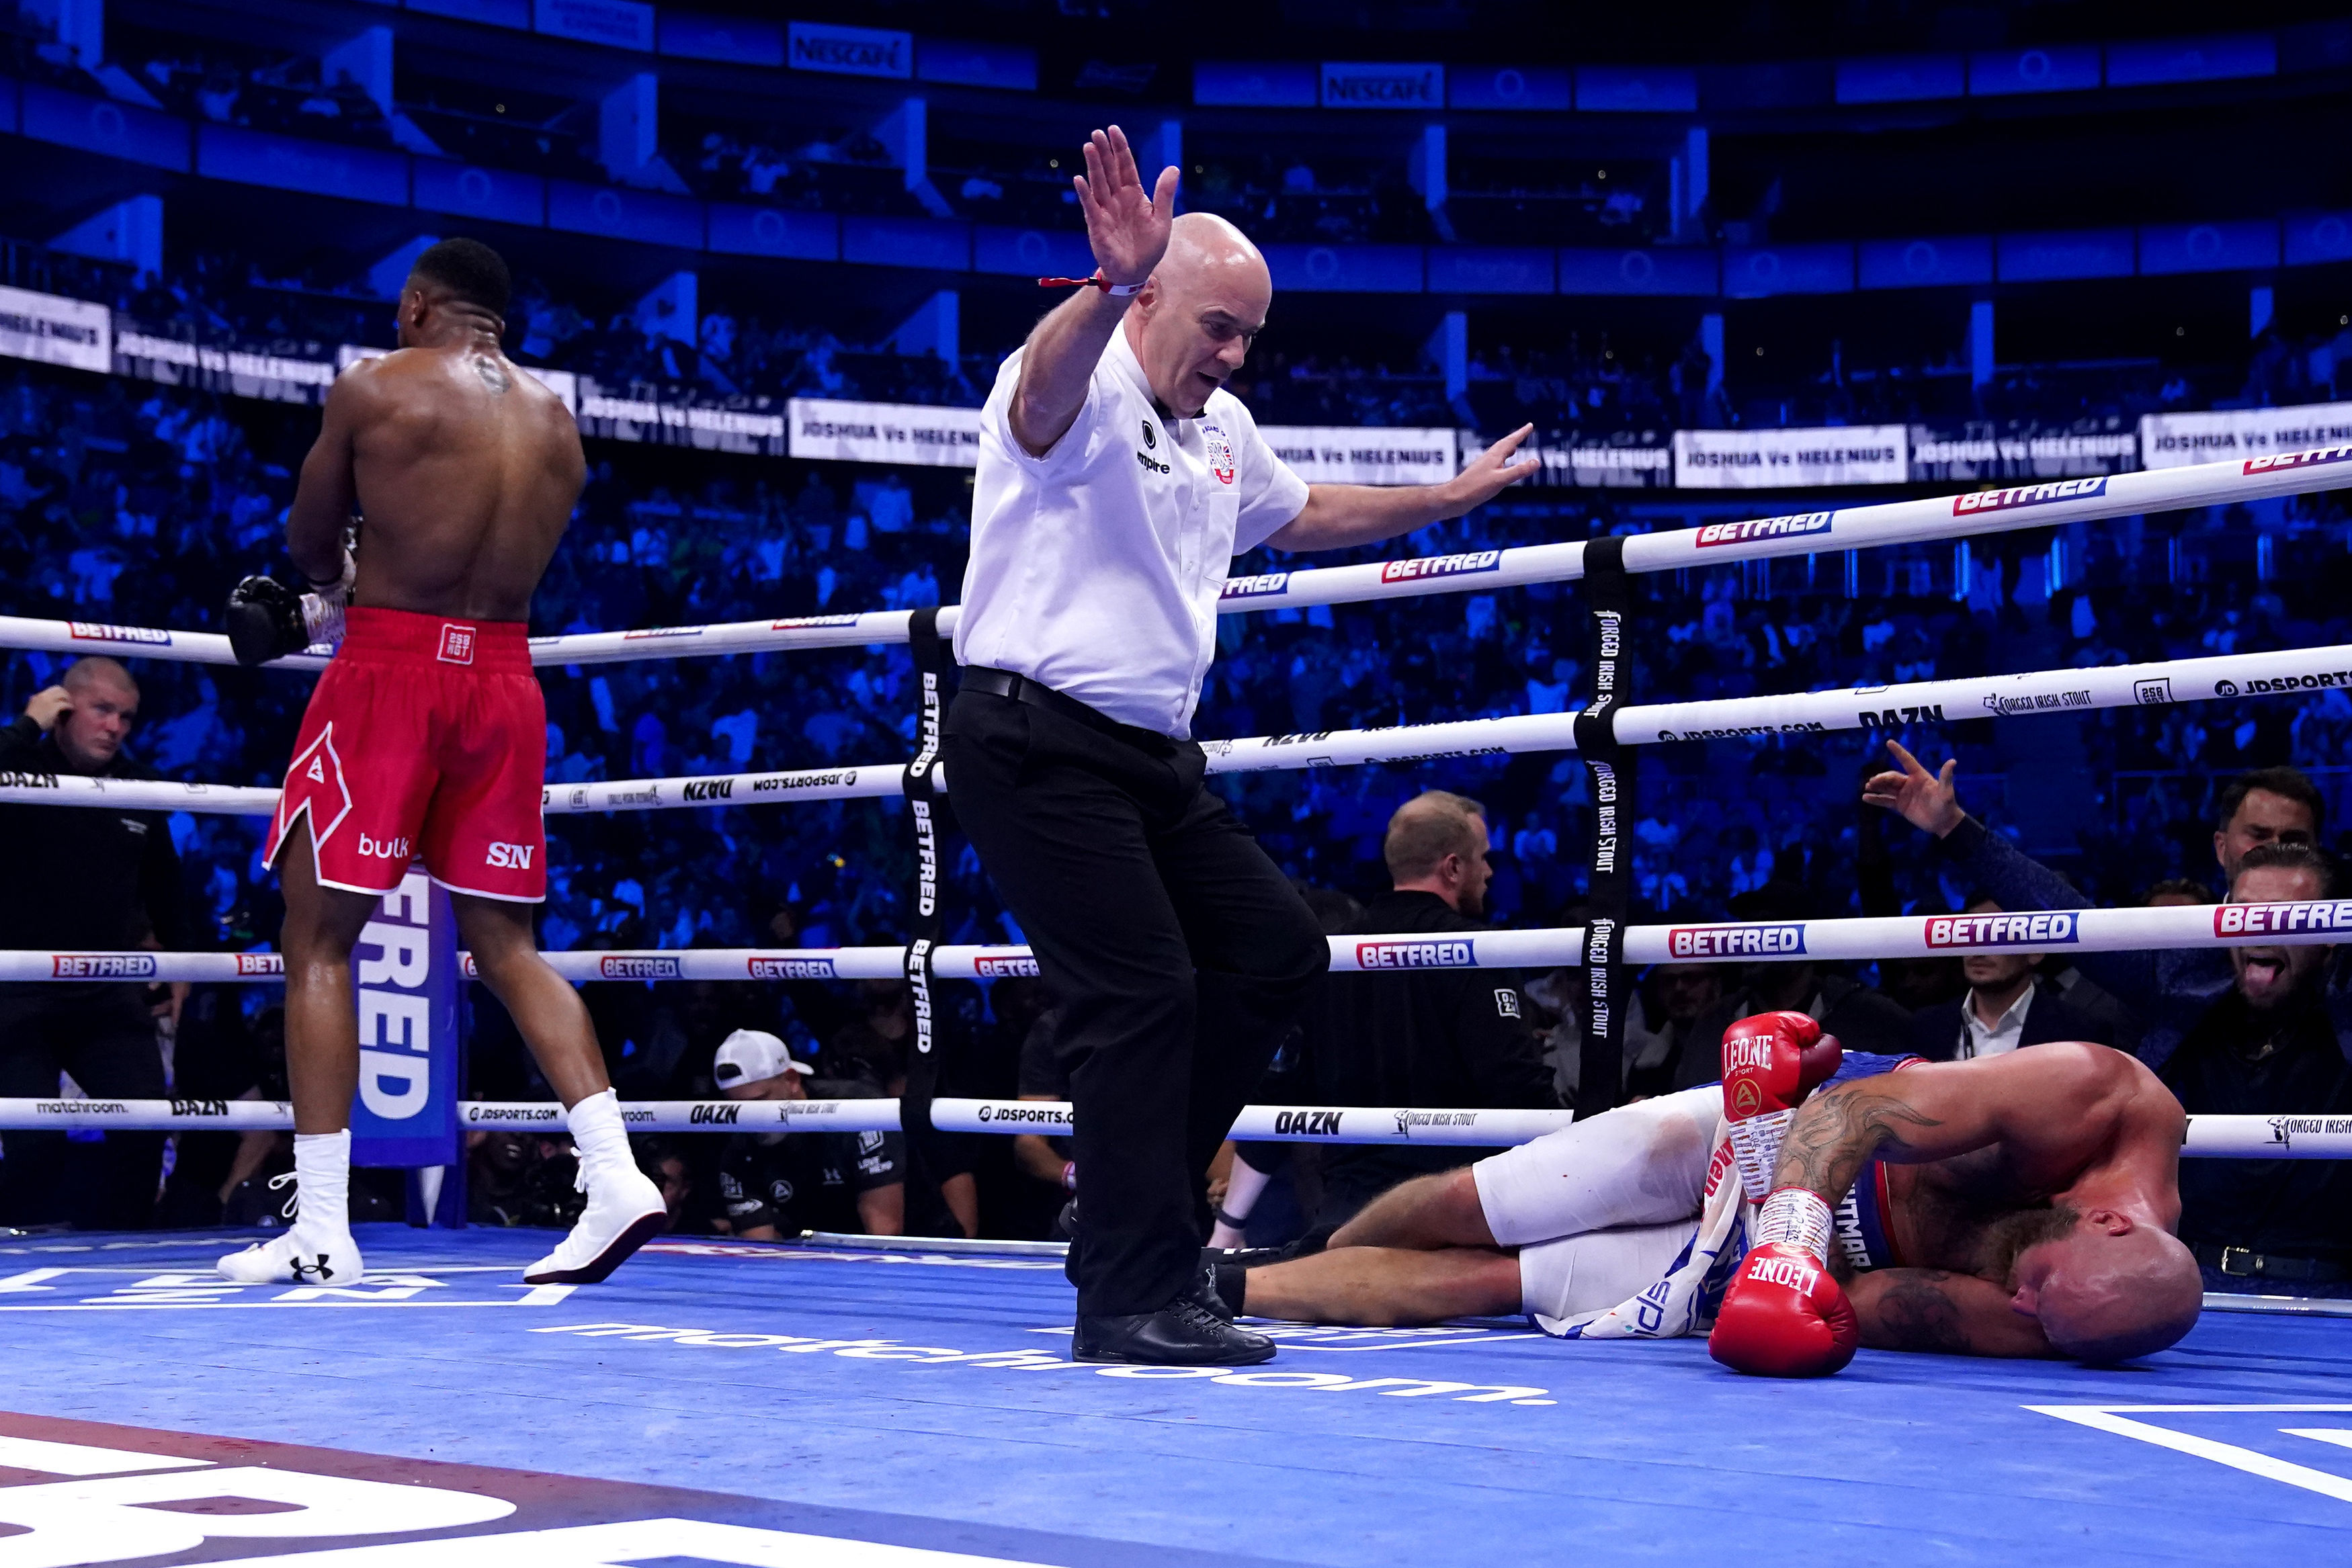 As it happened Anthony Joshua stops Robert Helenius with heavyweight finish to set up Deontay Wilder fight - Live